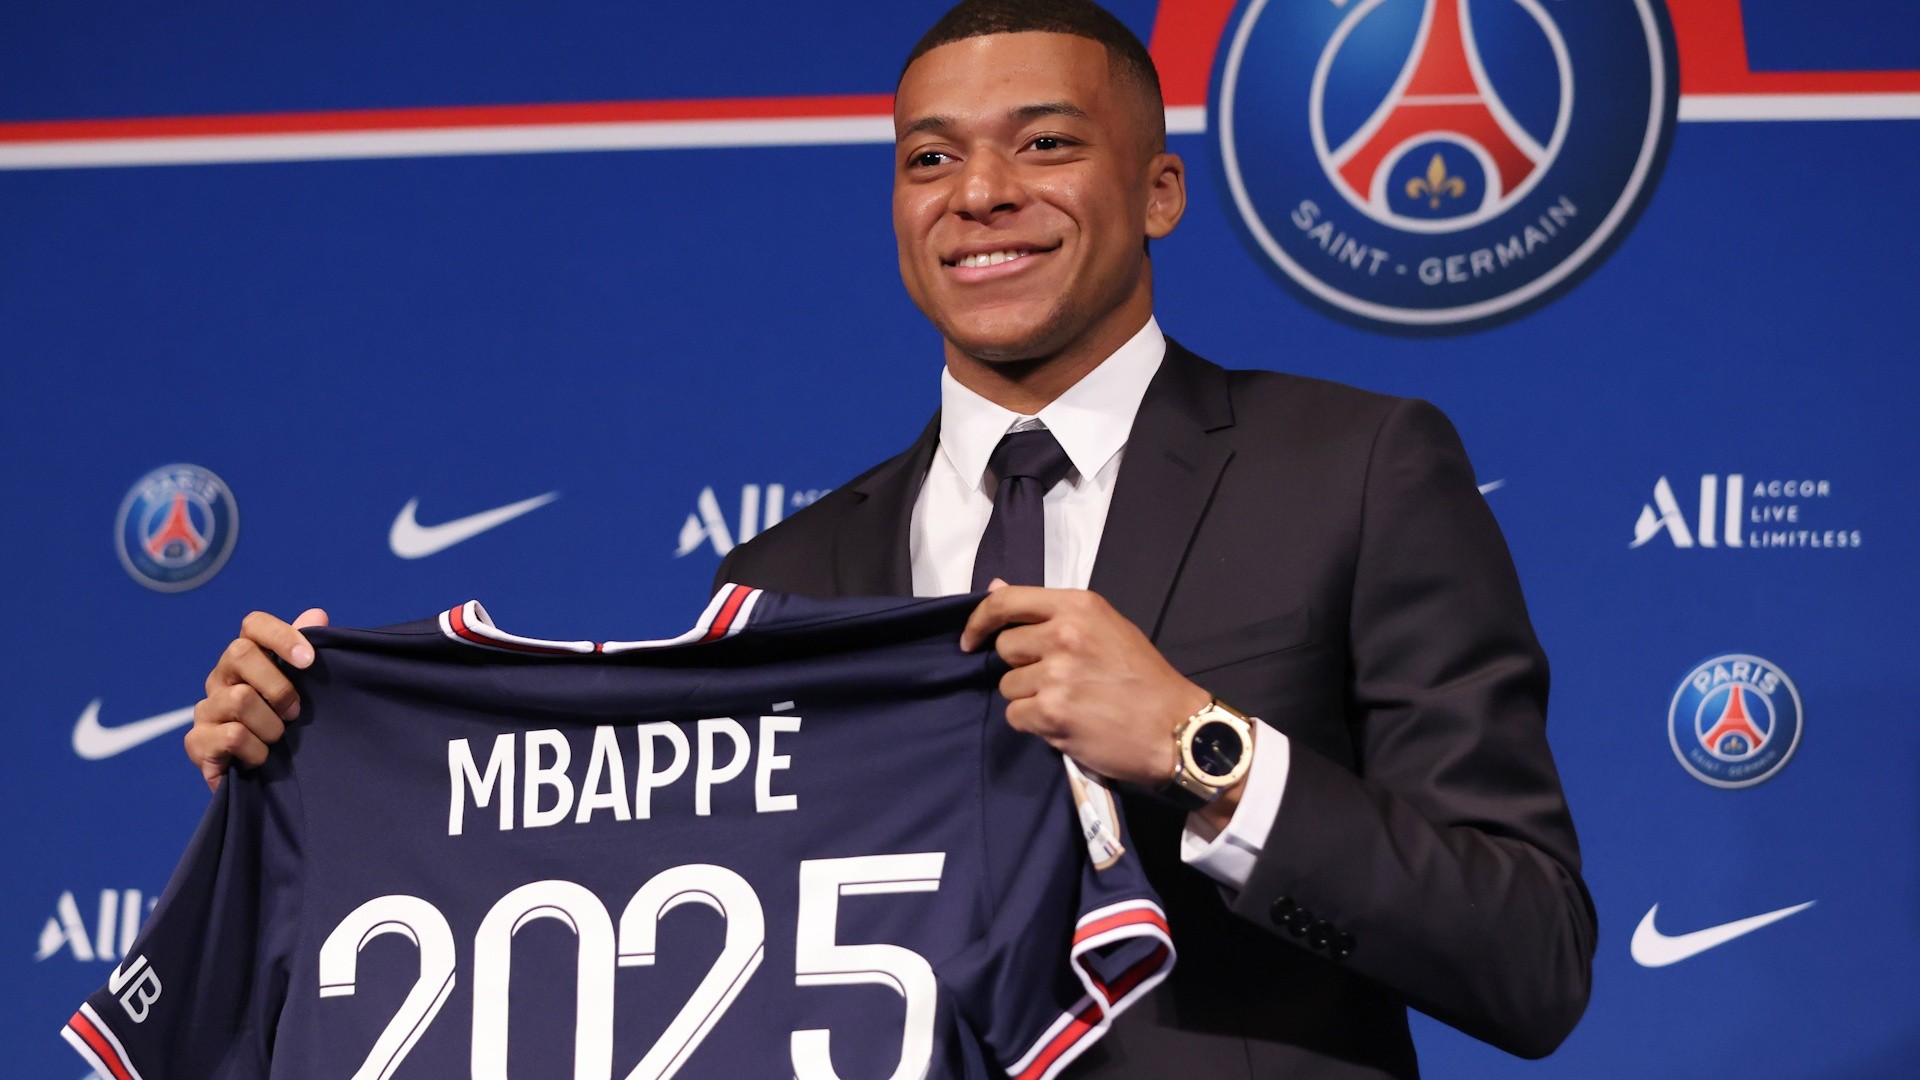 It's not real news' - Campos issues emphatic denial of Mbappe PSG exit  rumours